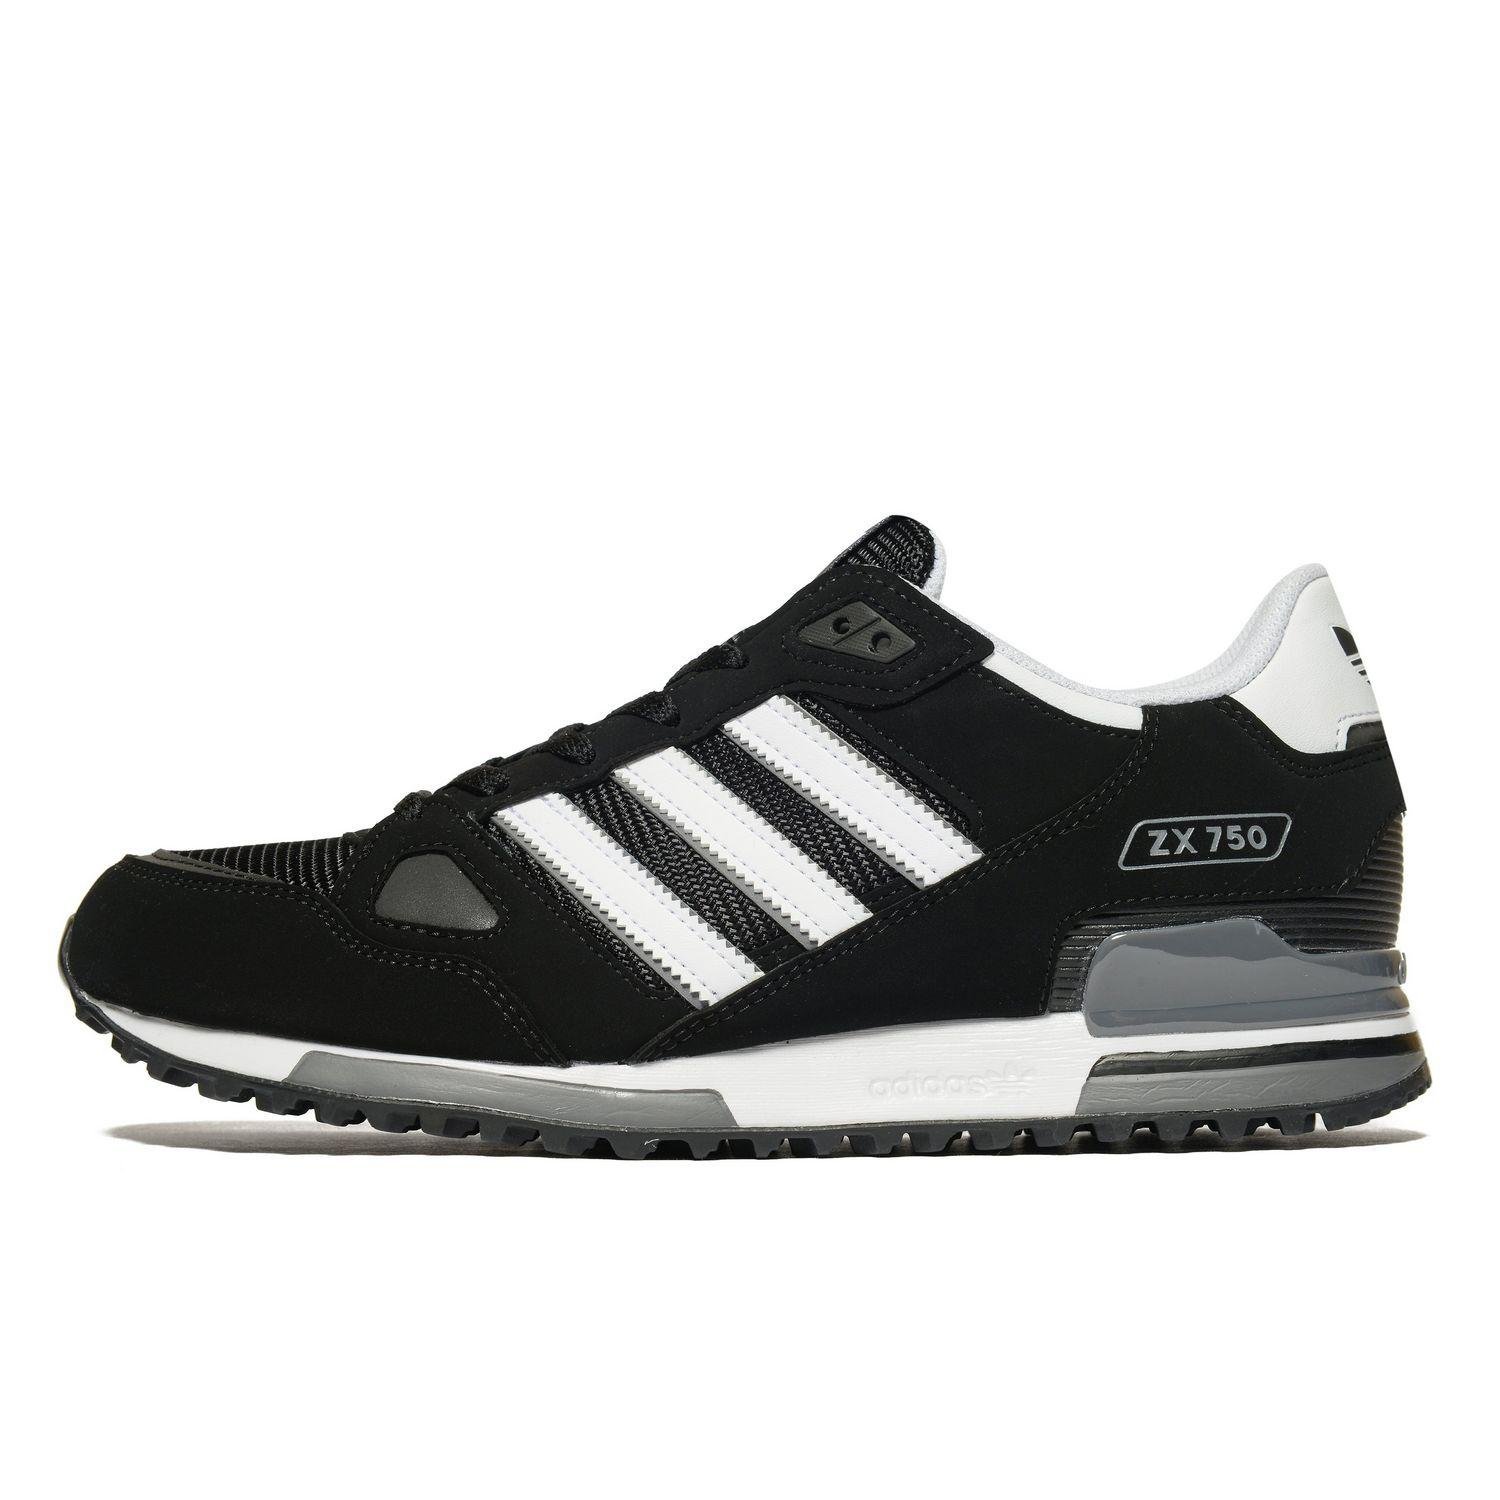 adidas Originals Synthetic Zx 750 in Black/White (Black) for Men - Lyst